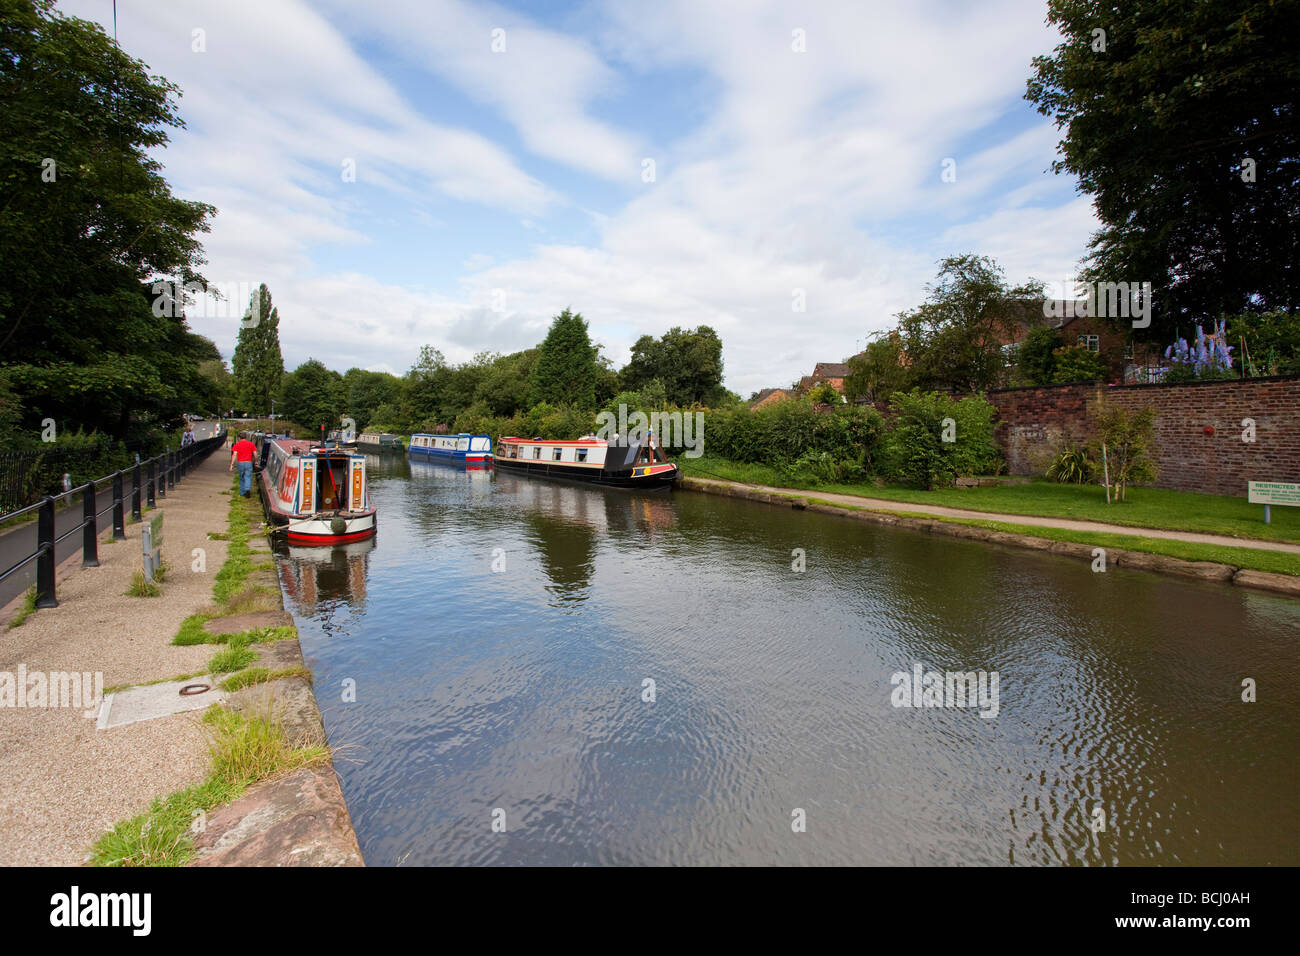 Canal and boats in Lymm, Warrington, Cheshire, England Stock Photo